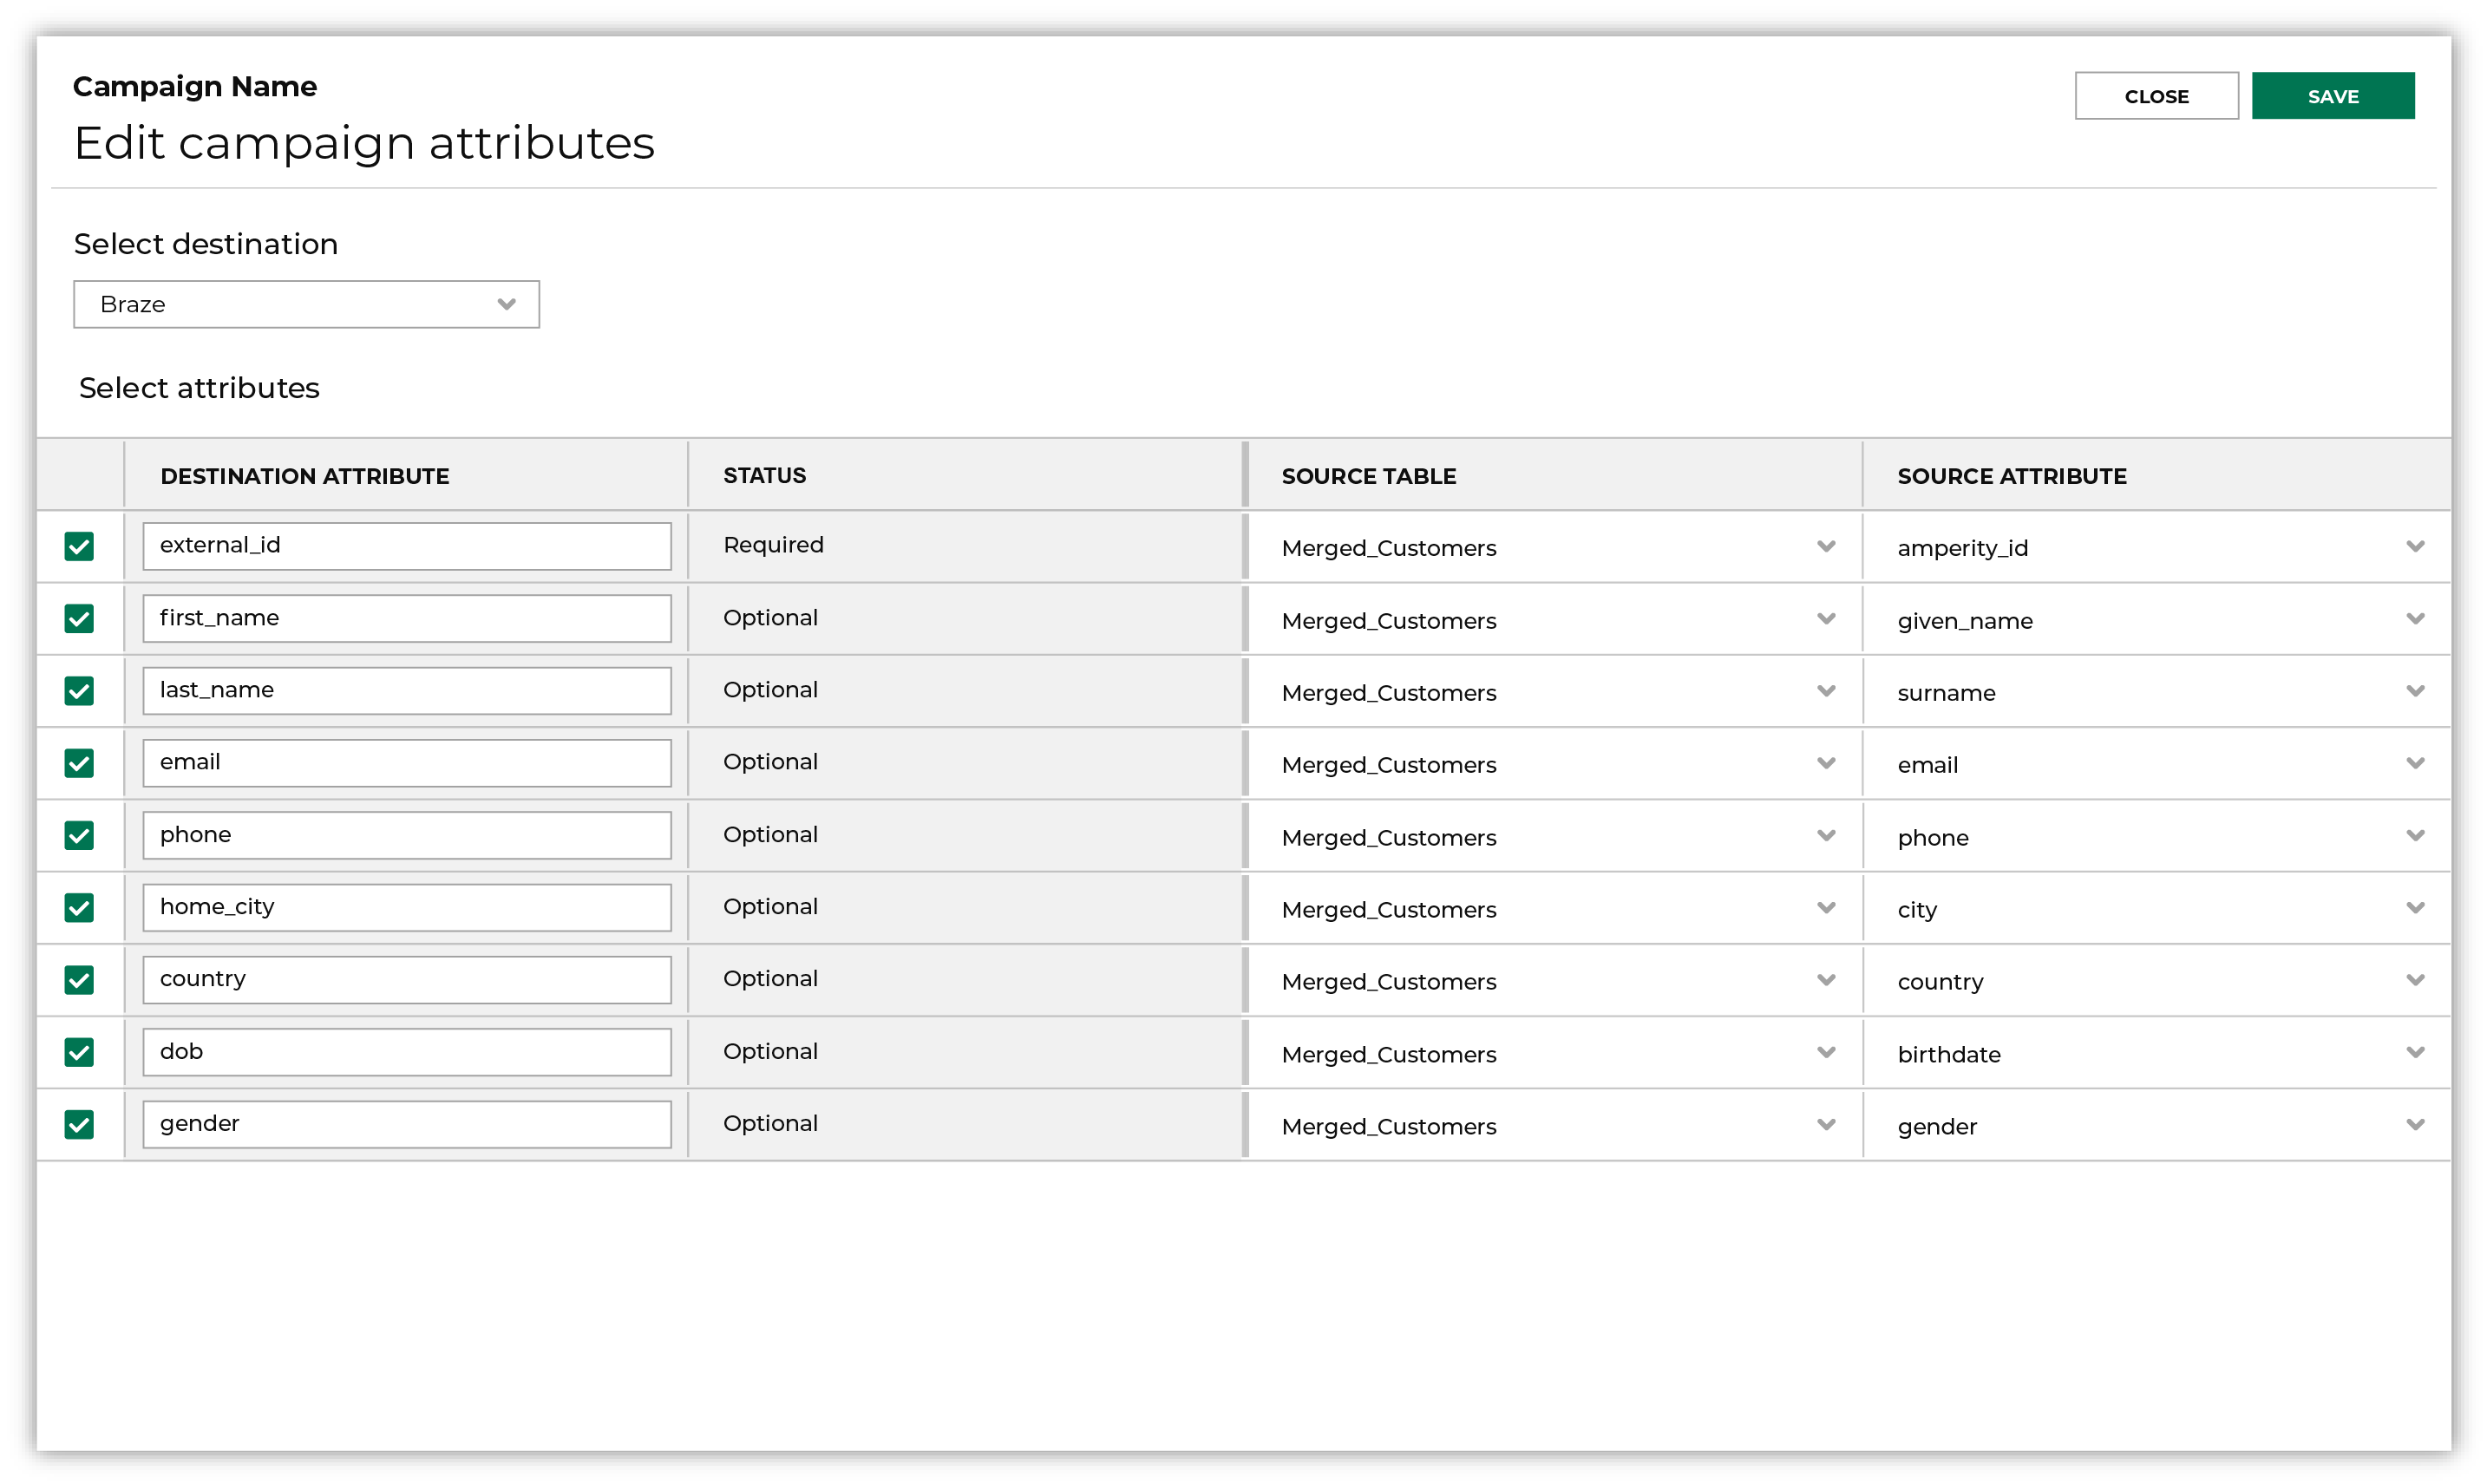 Configure the list of attributes to match the user profile field requirements for Braze.